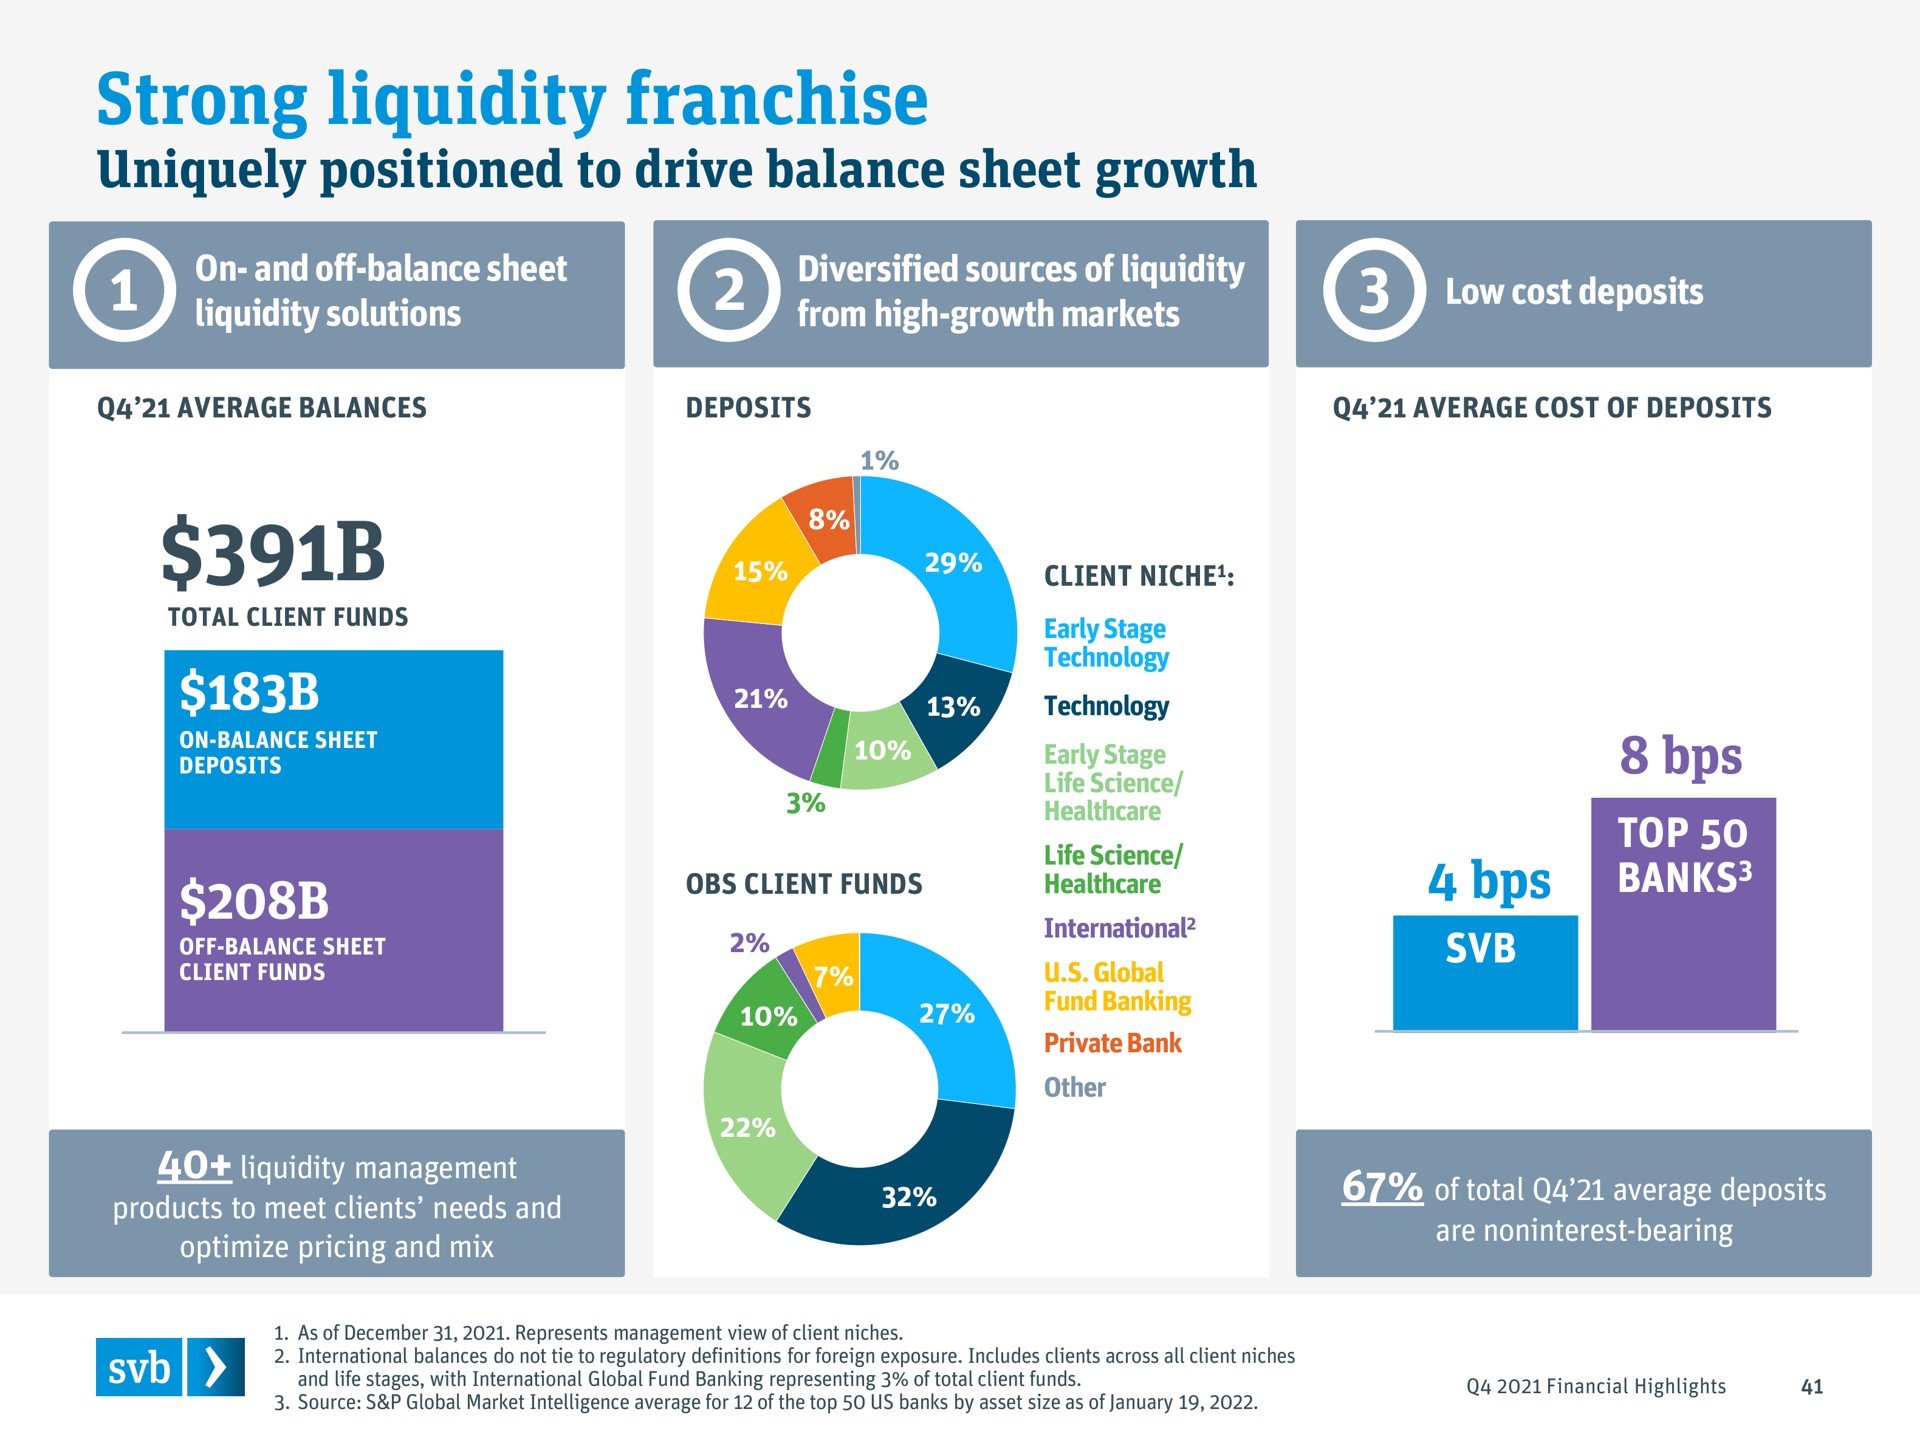 strong liquidity franchise uniquely positioned to drive balance sheet growth | Silicon Valley Bank